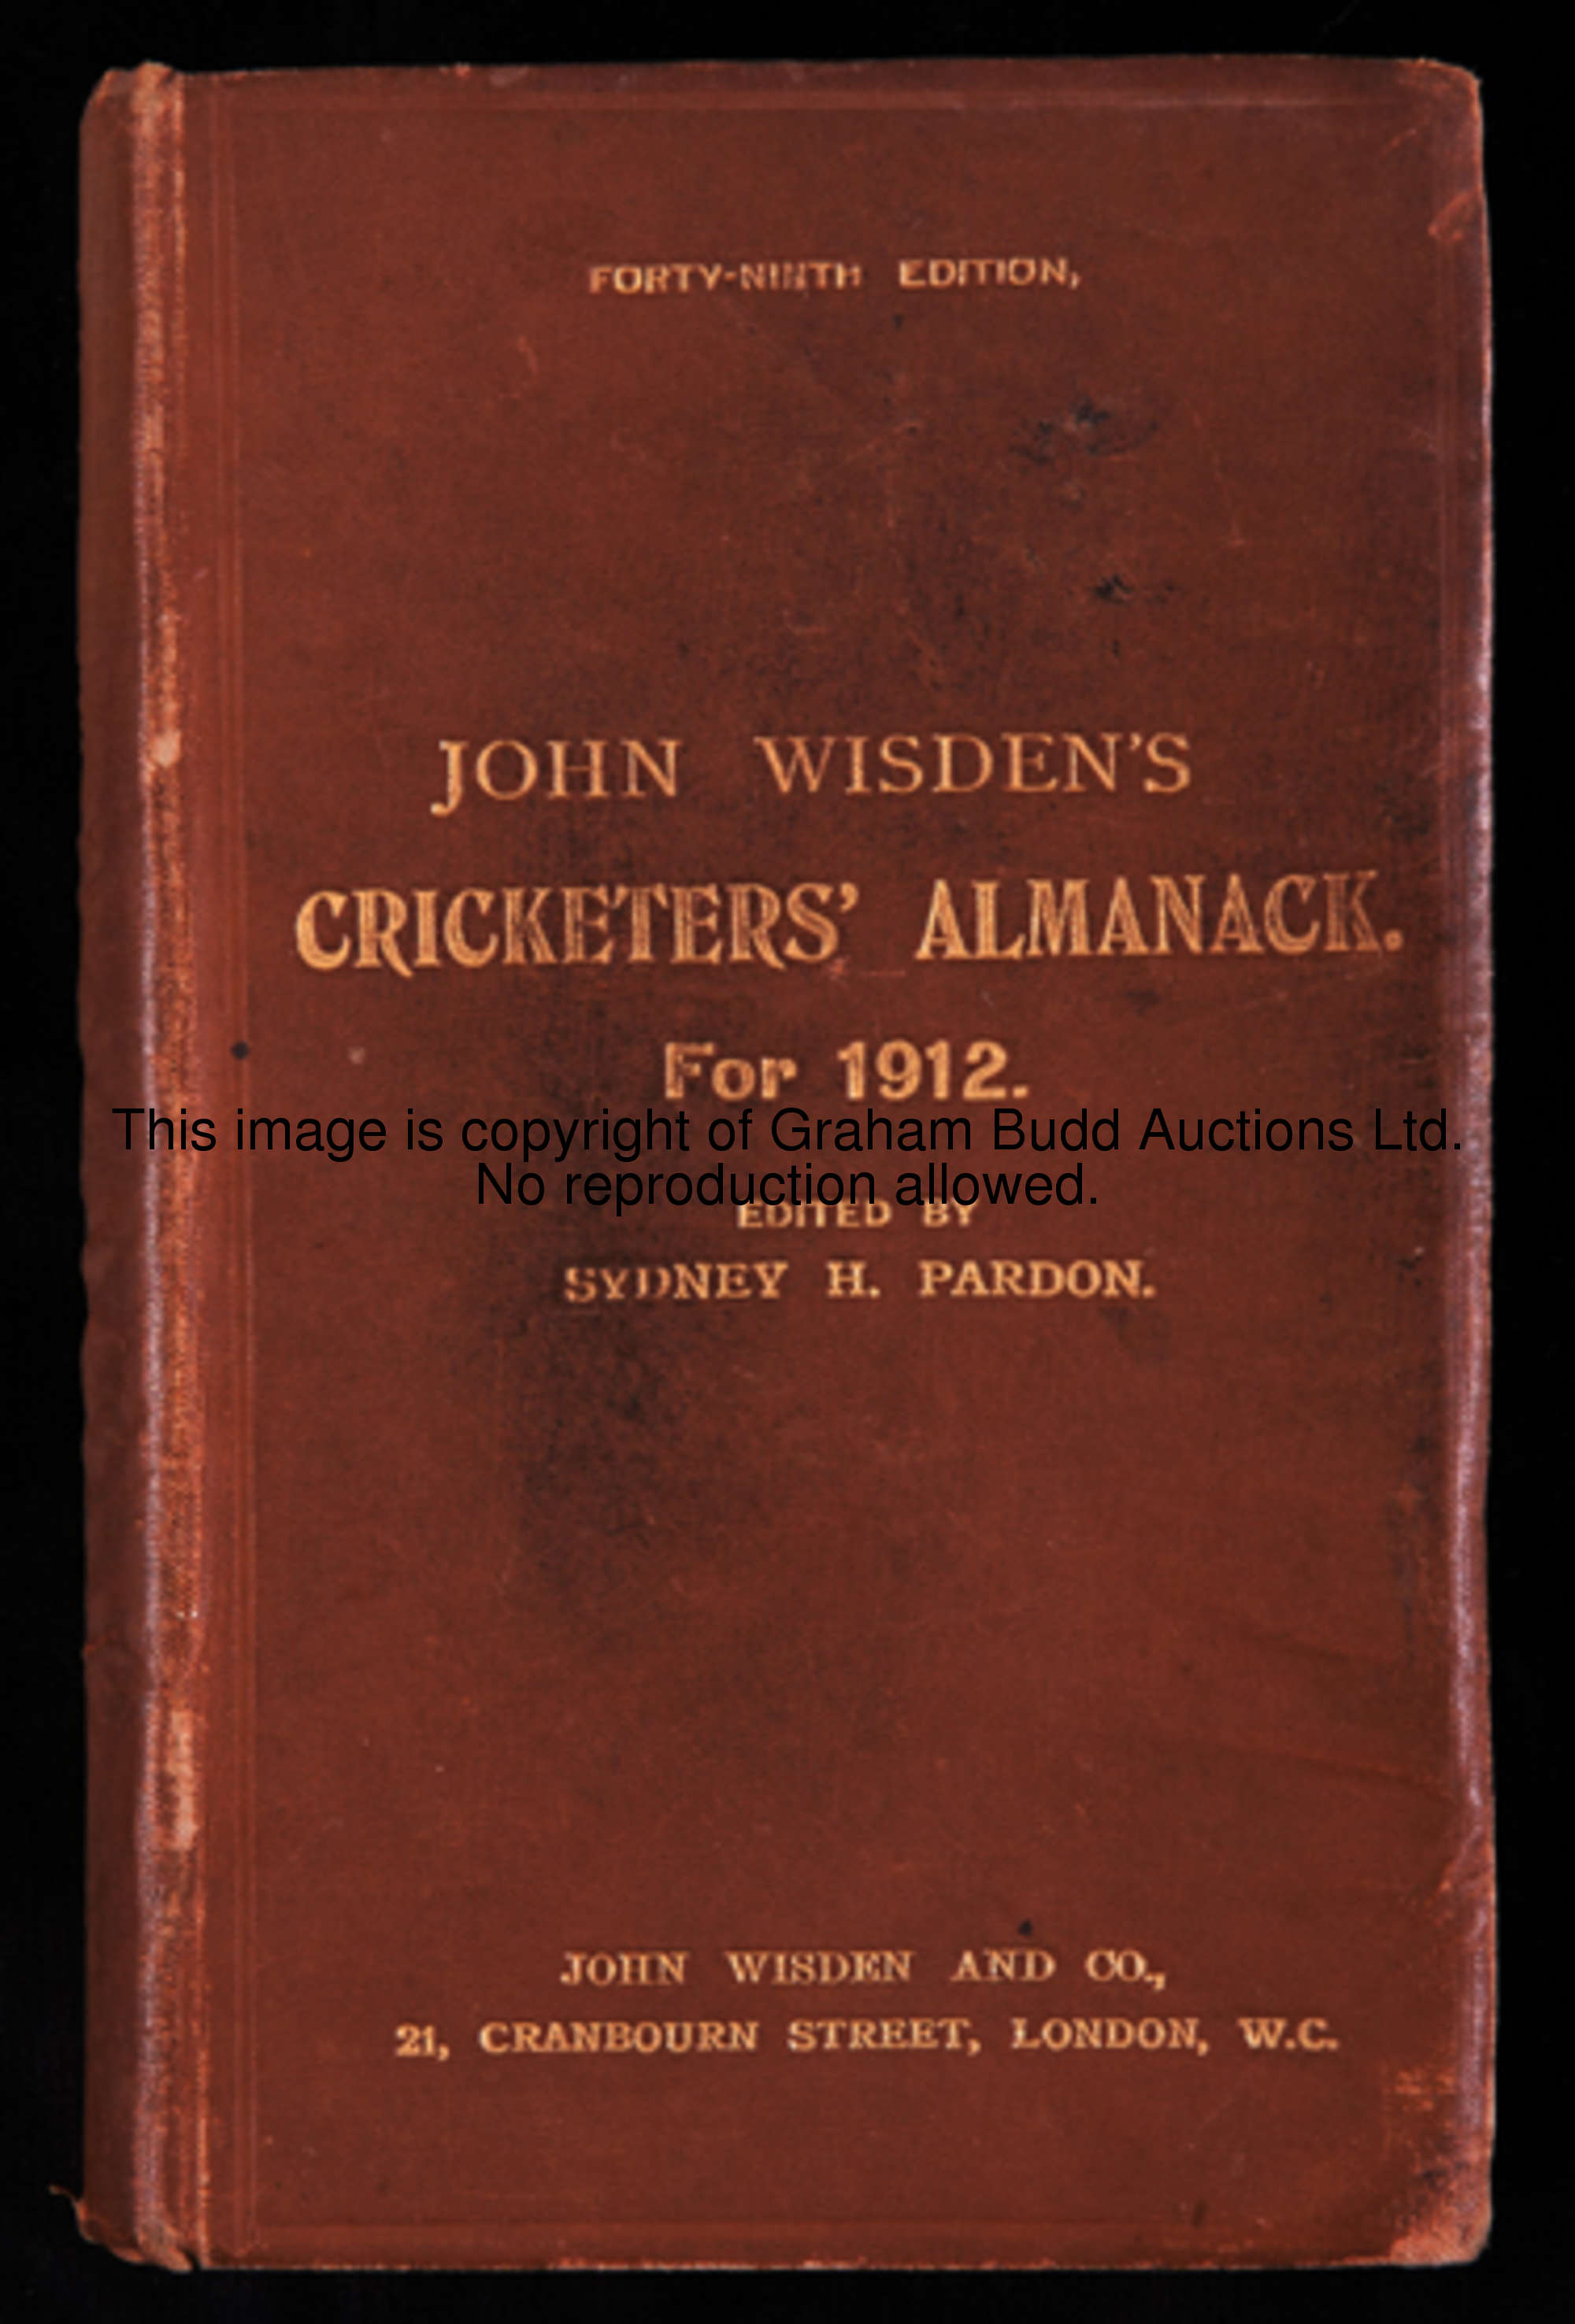 John Wisden's Cricketers' Almanack 1912 original hardback, substantial damage and paper loss to page...